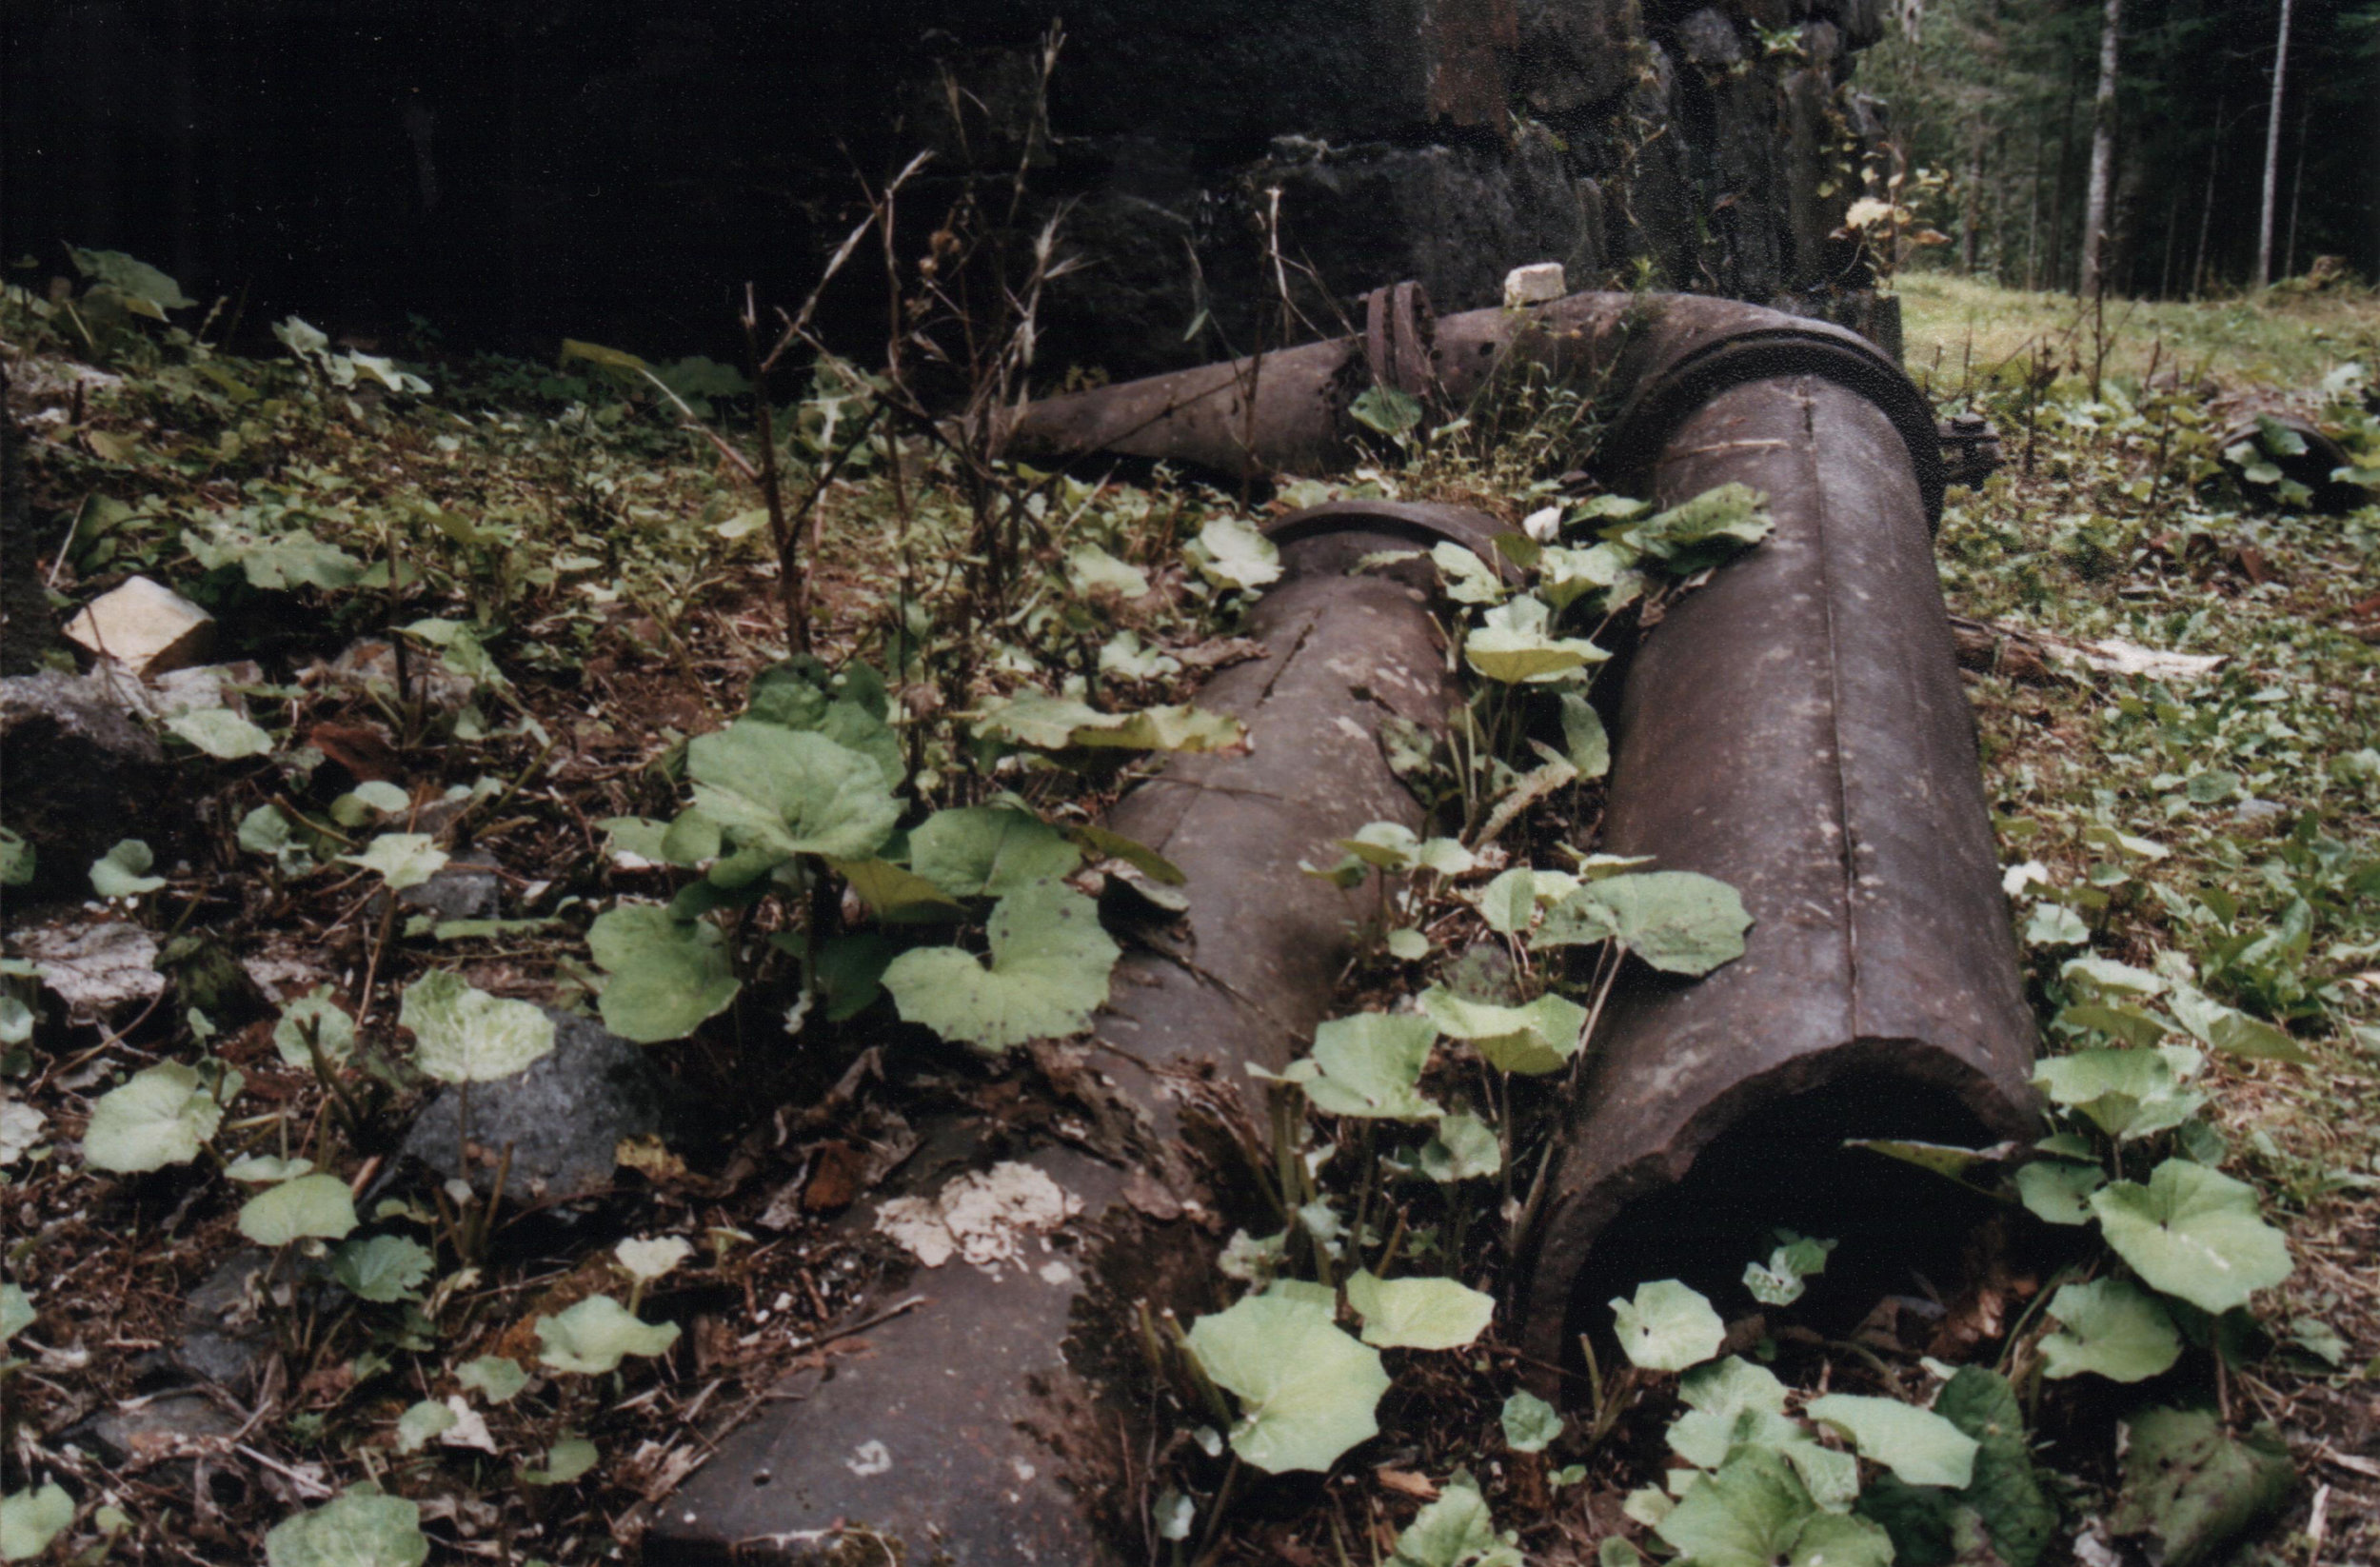 Pipes I – Shattered steam pipes near the foot of the blast furnace